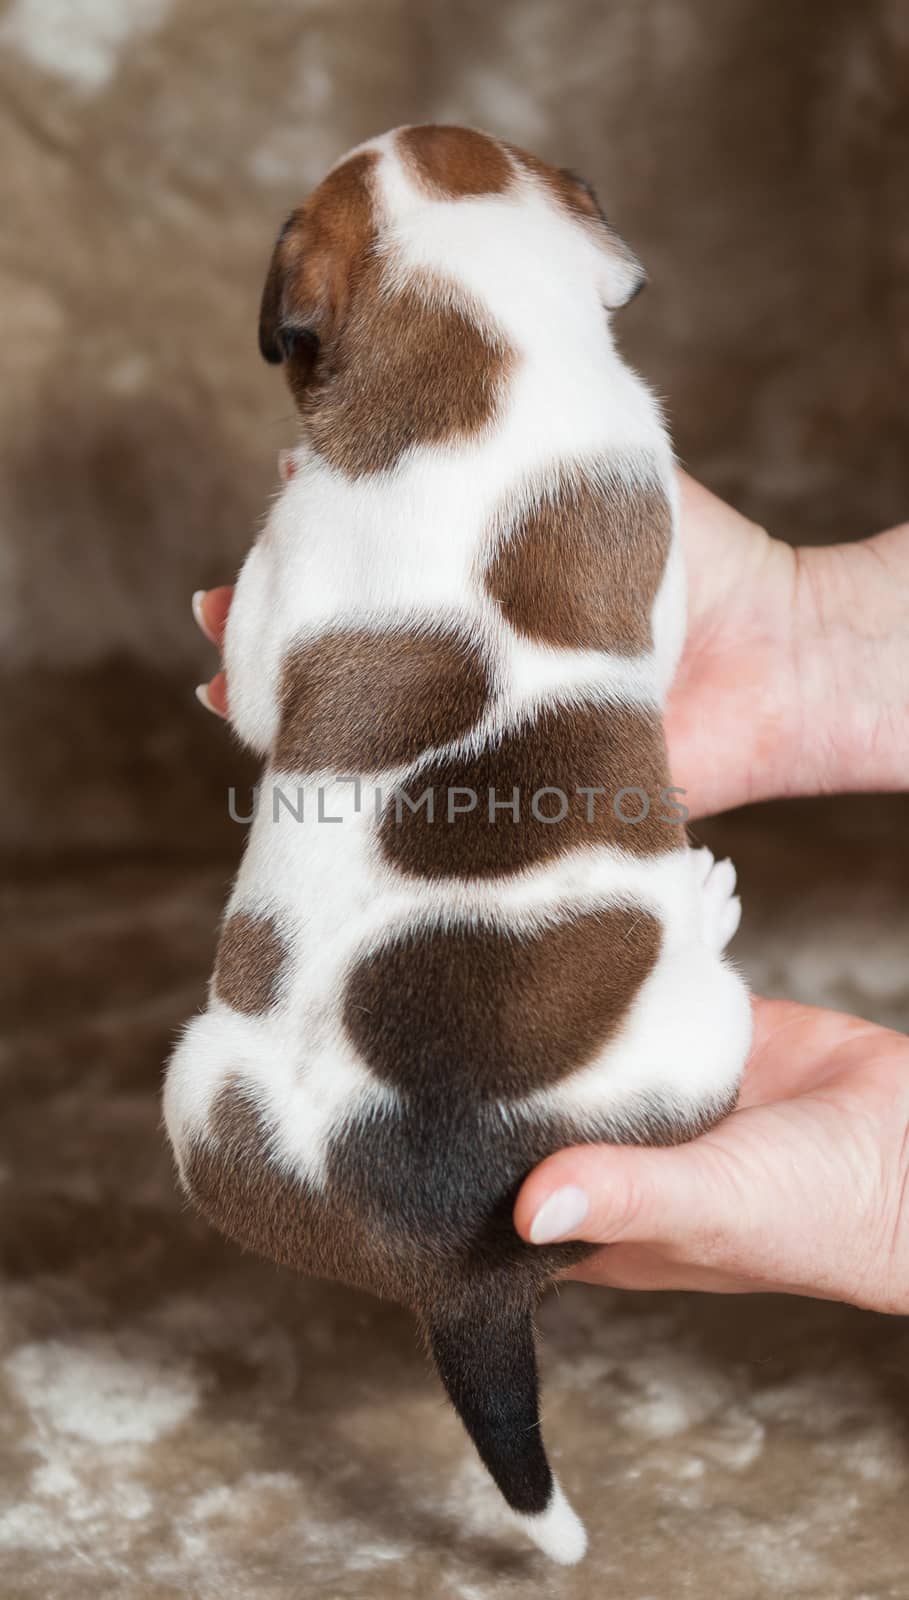 Small American Bulldog puppy back view on hands by infinityyy